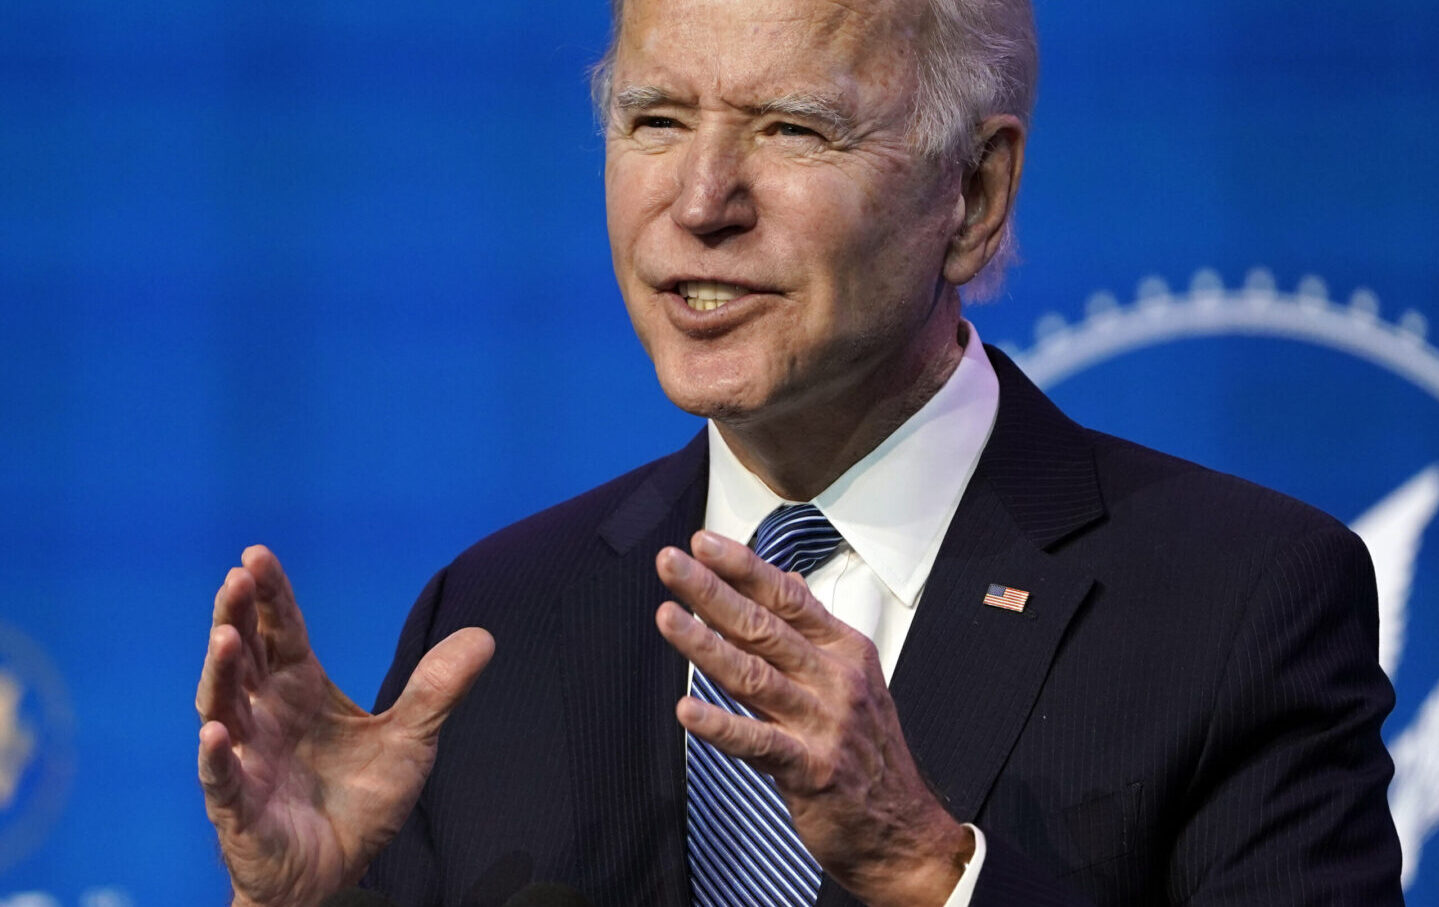 No Excuses: Biden Can Help End Racist Police Violence—From Day 1